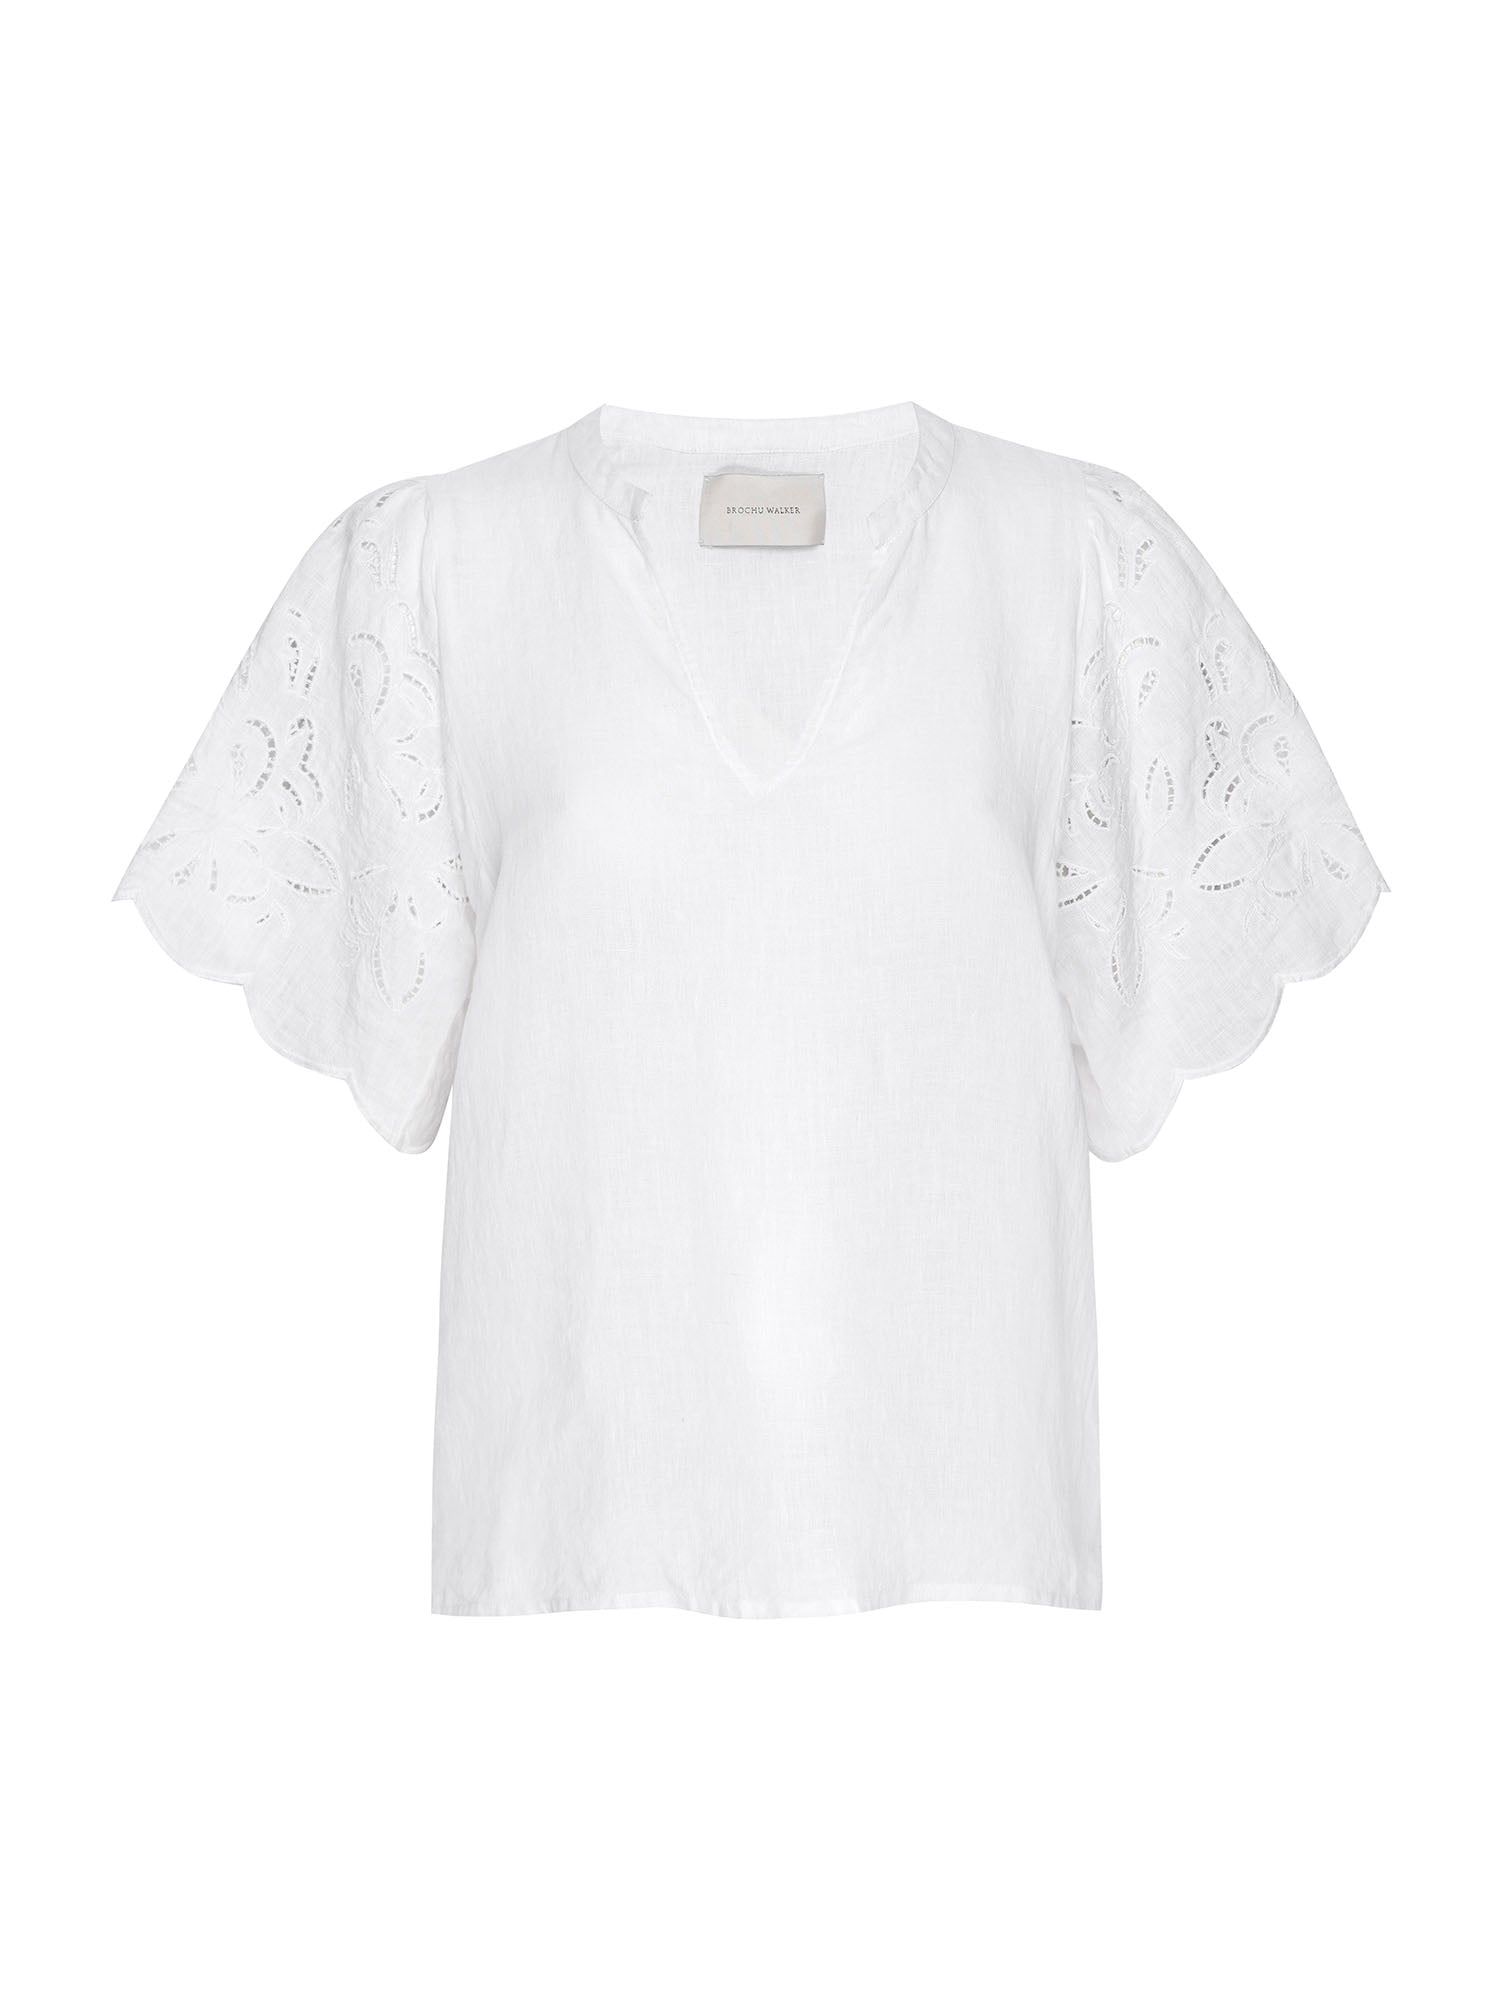 Shore linen embroidered sleeve white top flat view 